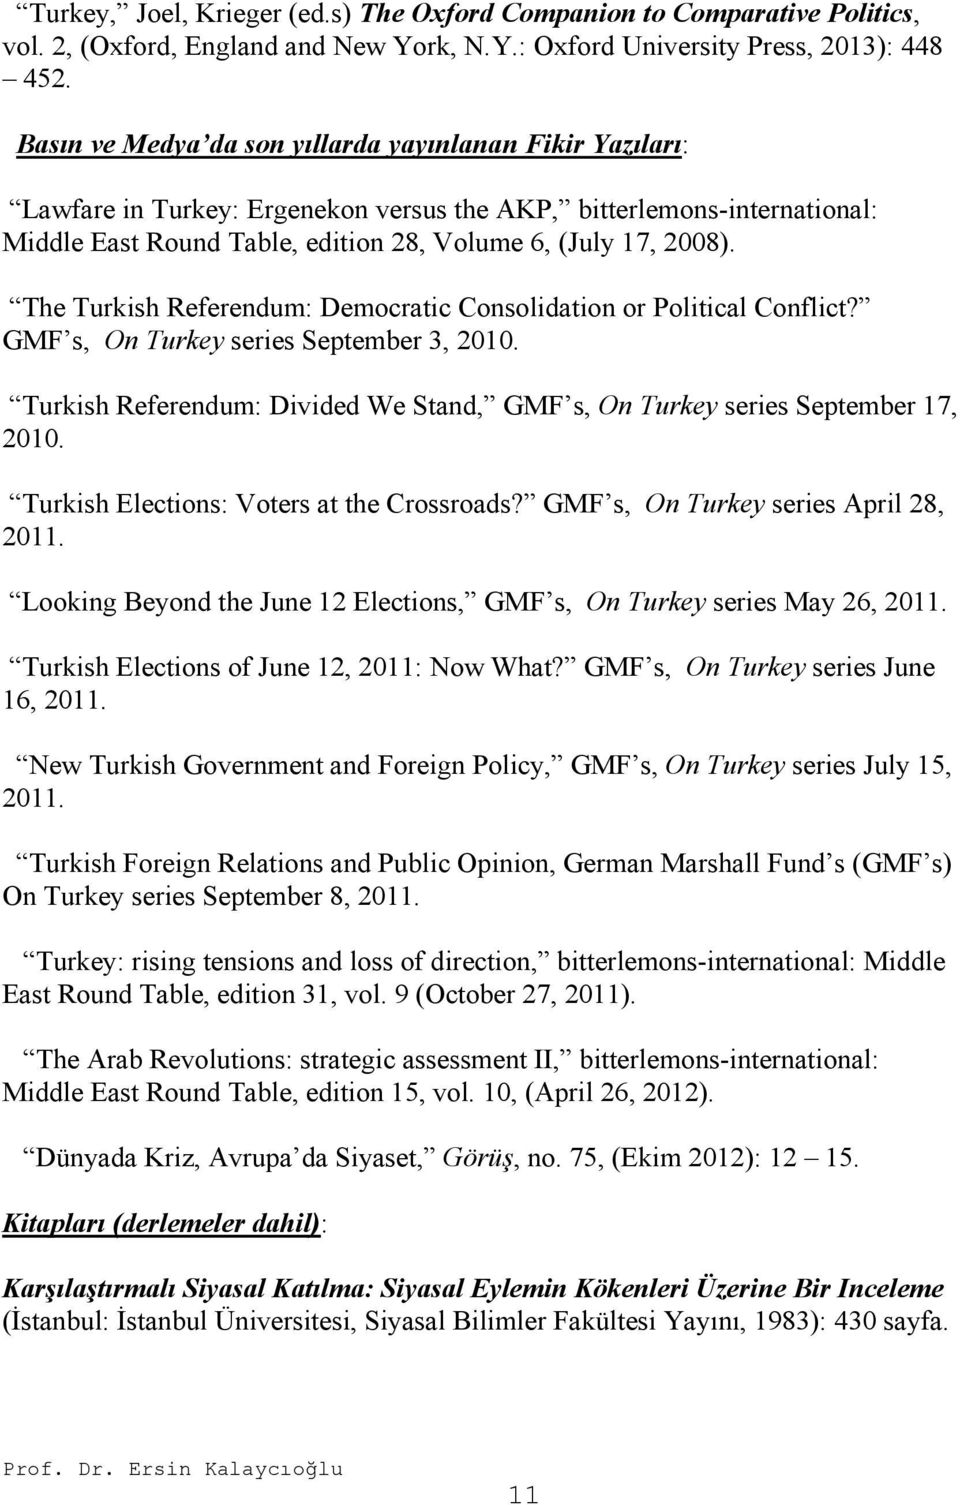 The Turkish Referendum: Democratic Consolidation or Political Conflict? GMF s, On Turkey series September 3, 2010. Turkish Referendum: Divided We Stand, GMF s, On Turkey series September 17, 2010.